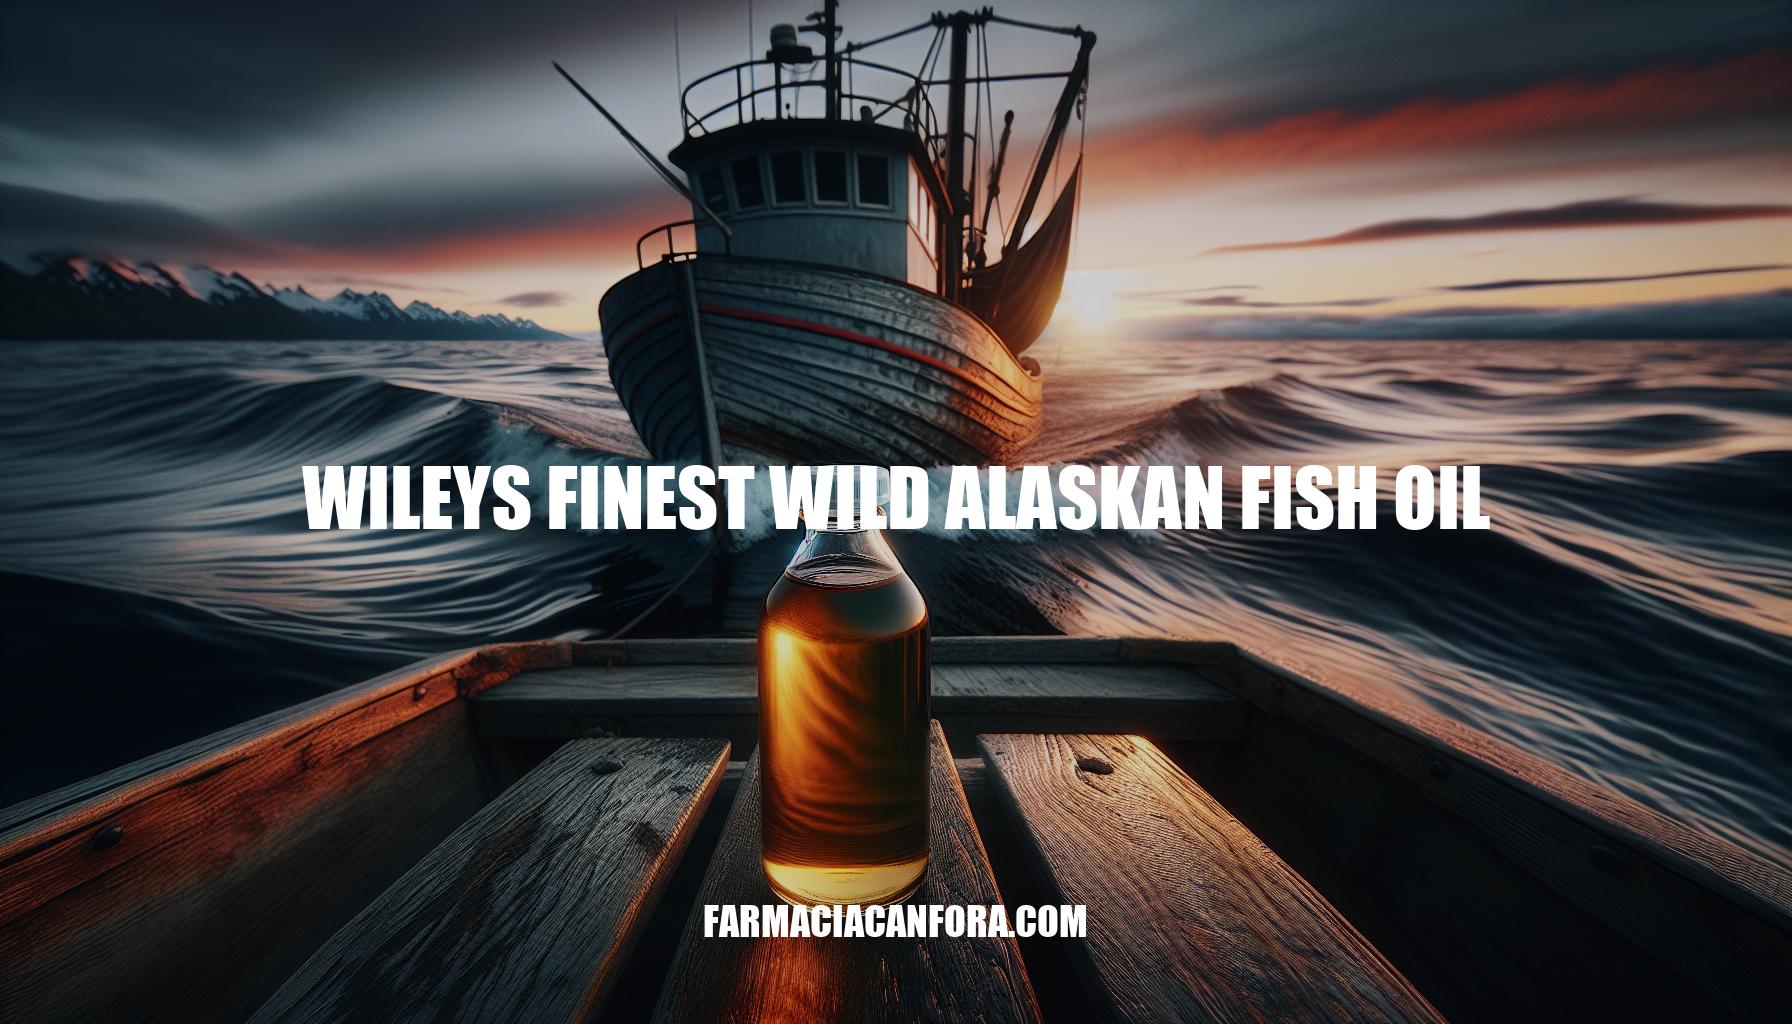 Discover Wiley's Finest Wild Alaskan Fish Oil Benefits